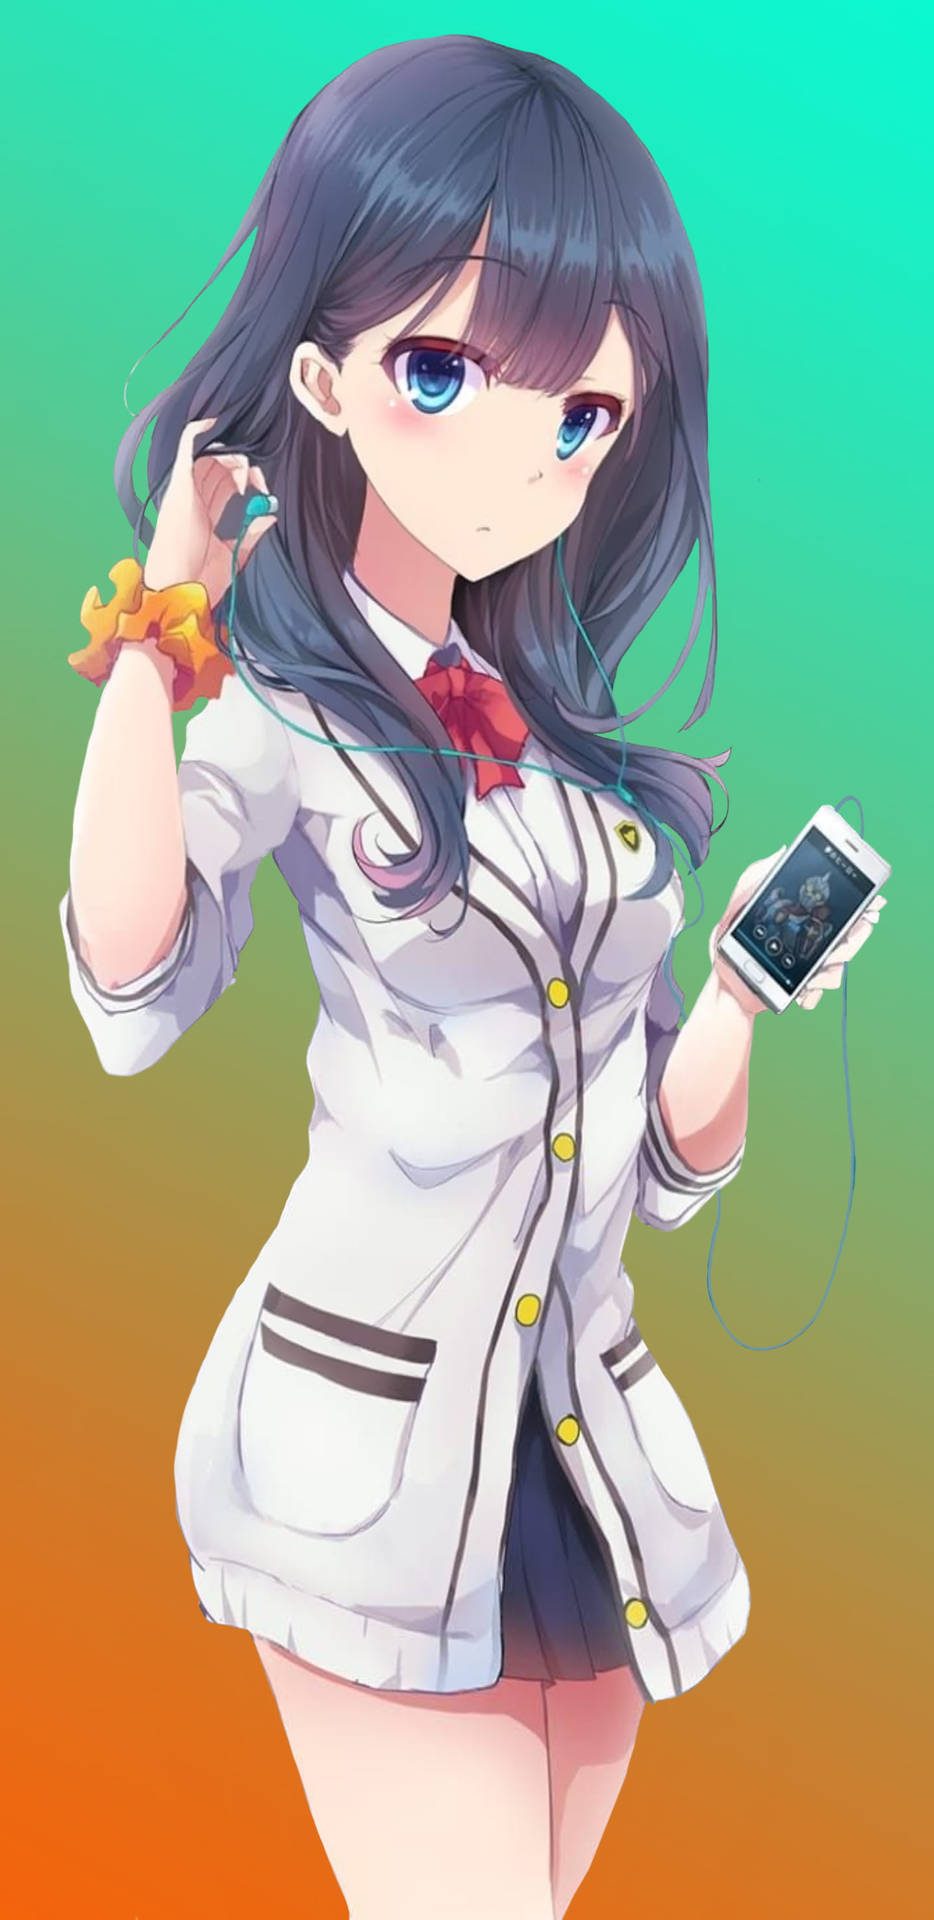 Download Anime Girl Listening To Music Phone Wallpaper 